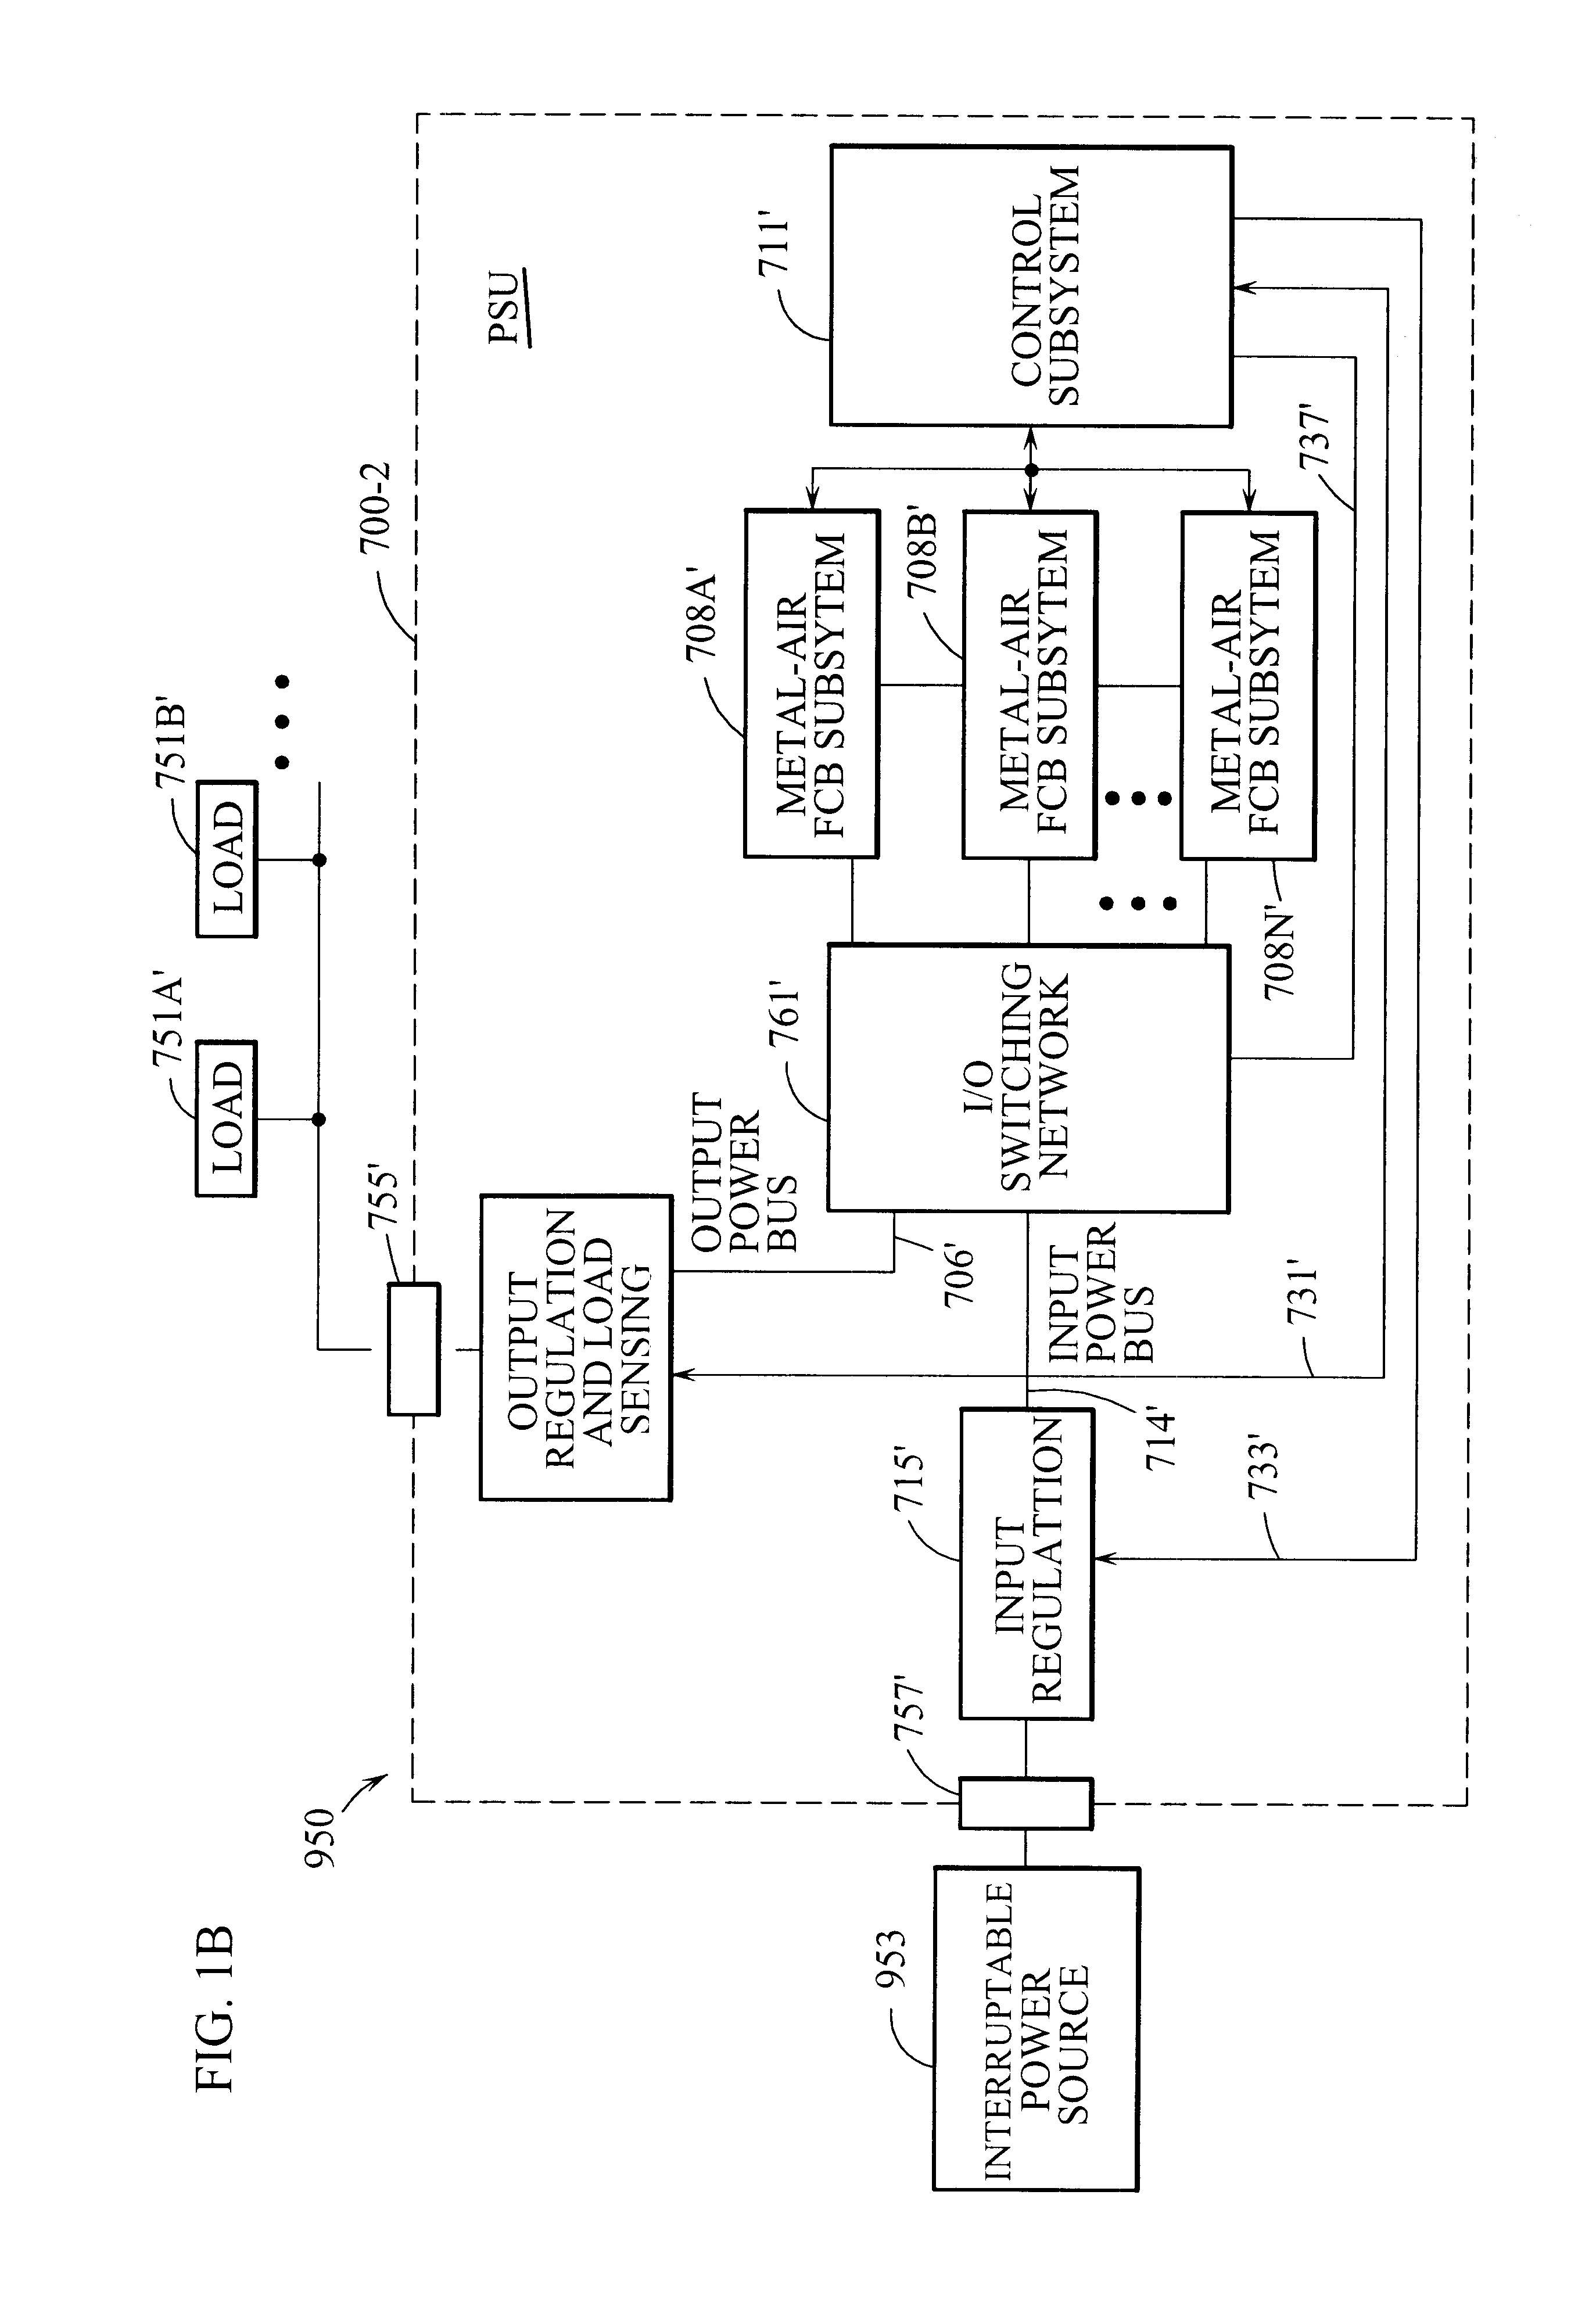 Refuelable and rechargeable metal-air fuel cell battery power supply unit for integration into an appliance